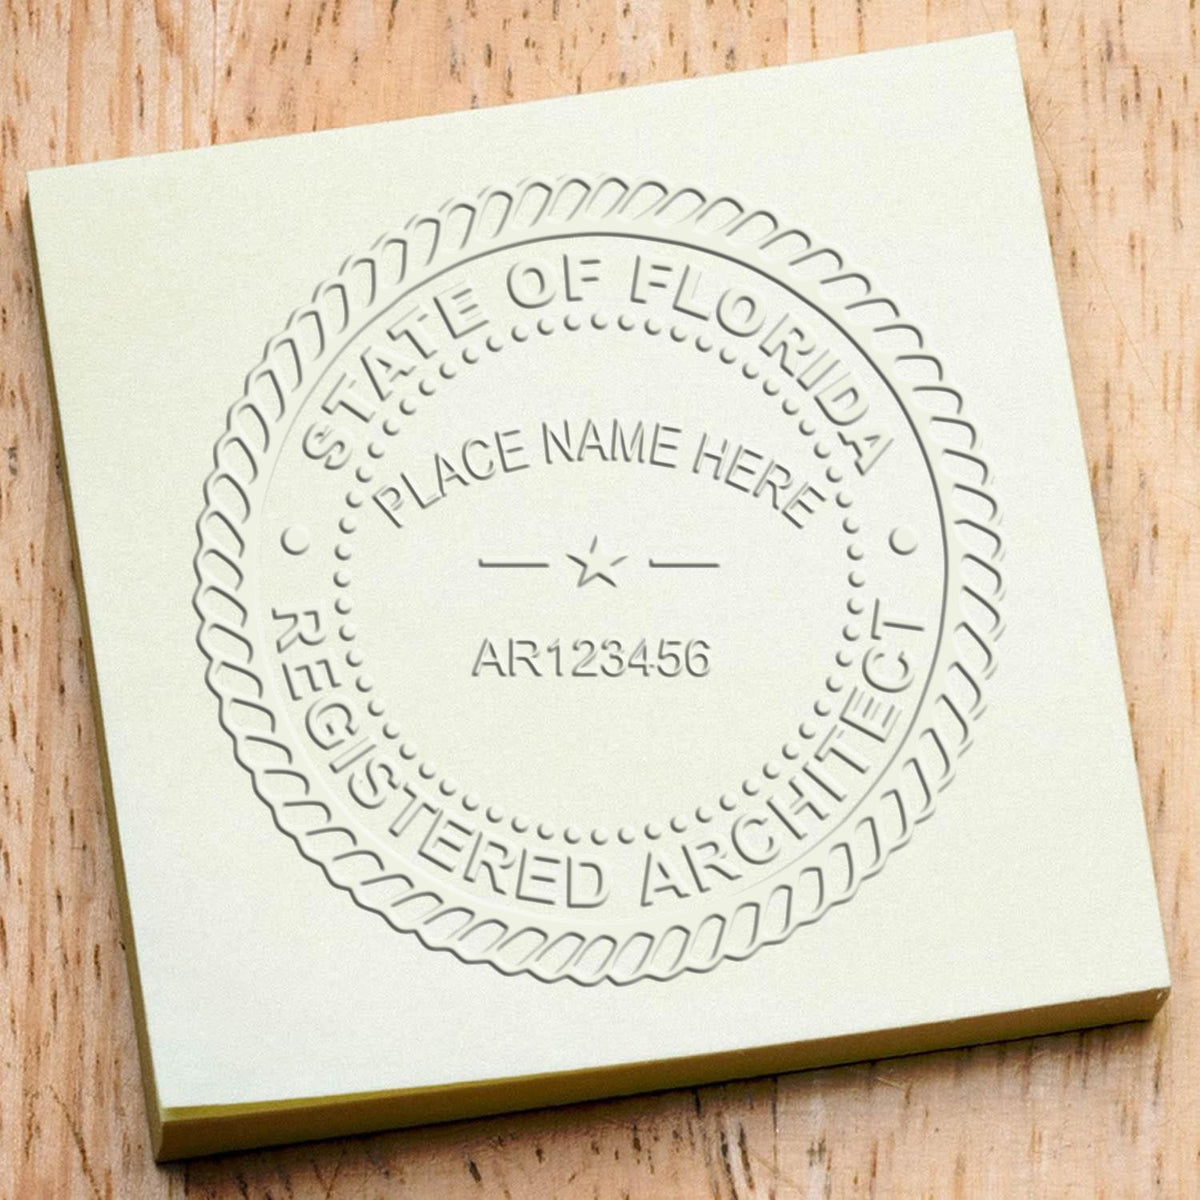 A lifestyle photo showing a stamped image of the Florida Desk Architect Embossing Seal on a piece of paper